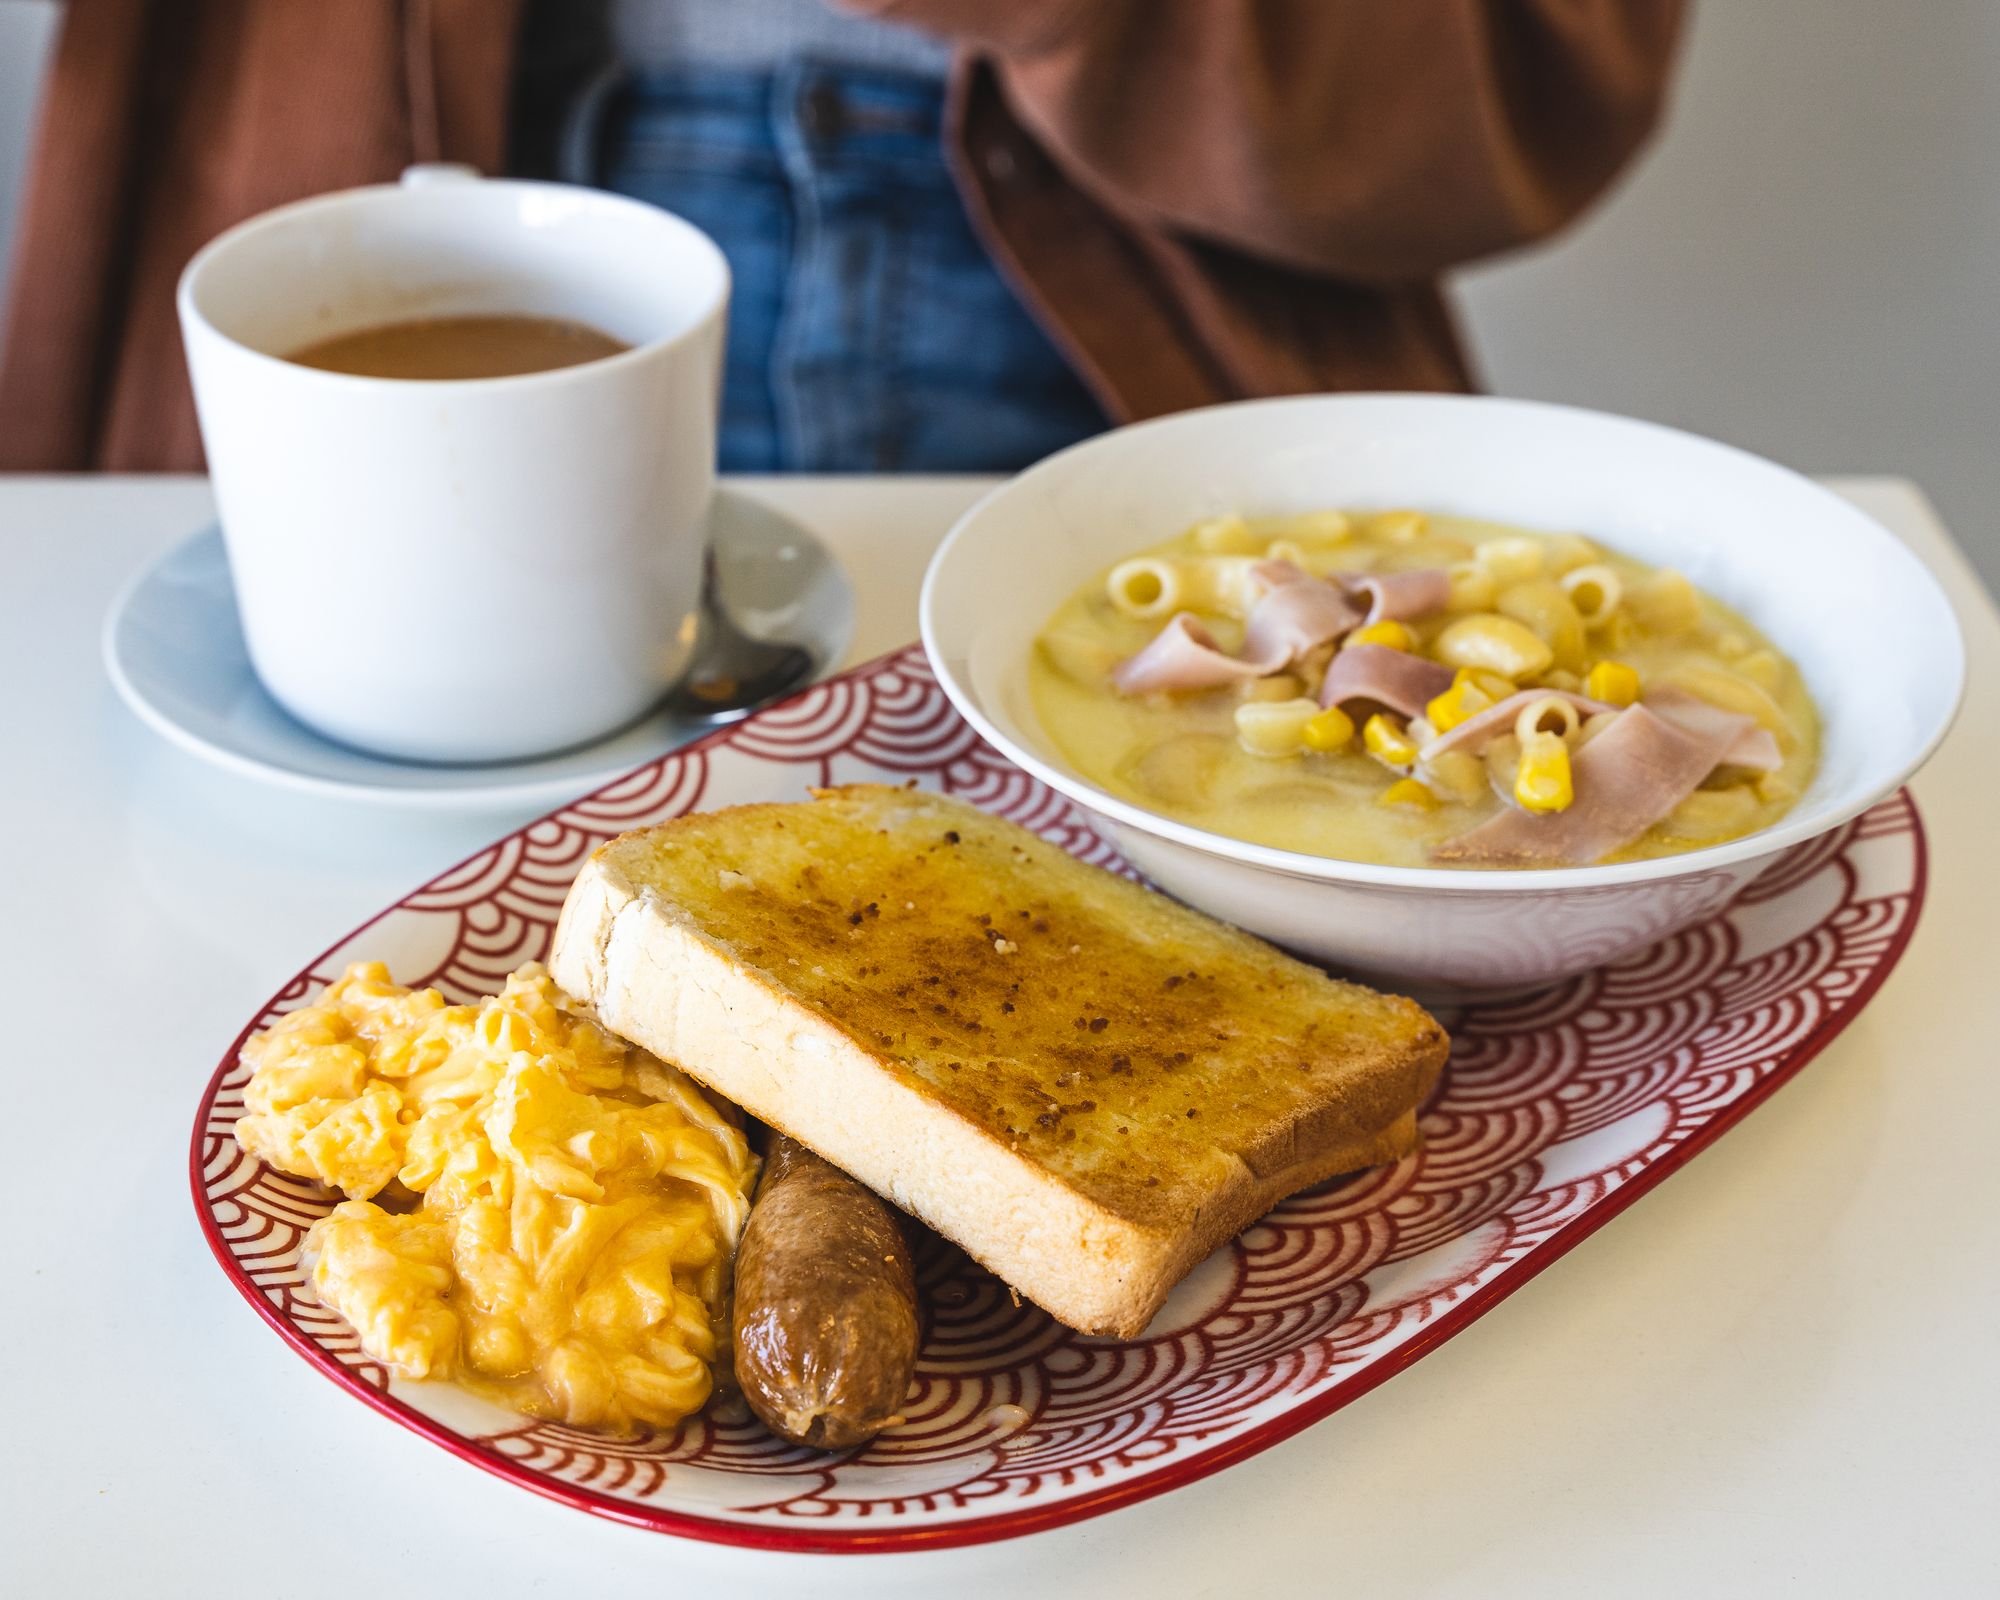 Plate with egg, sausage, toast, a bowl of macaroni and ham soup and a tea cup